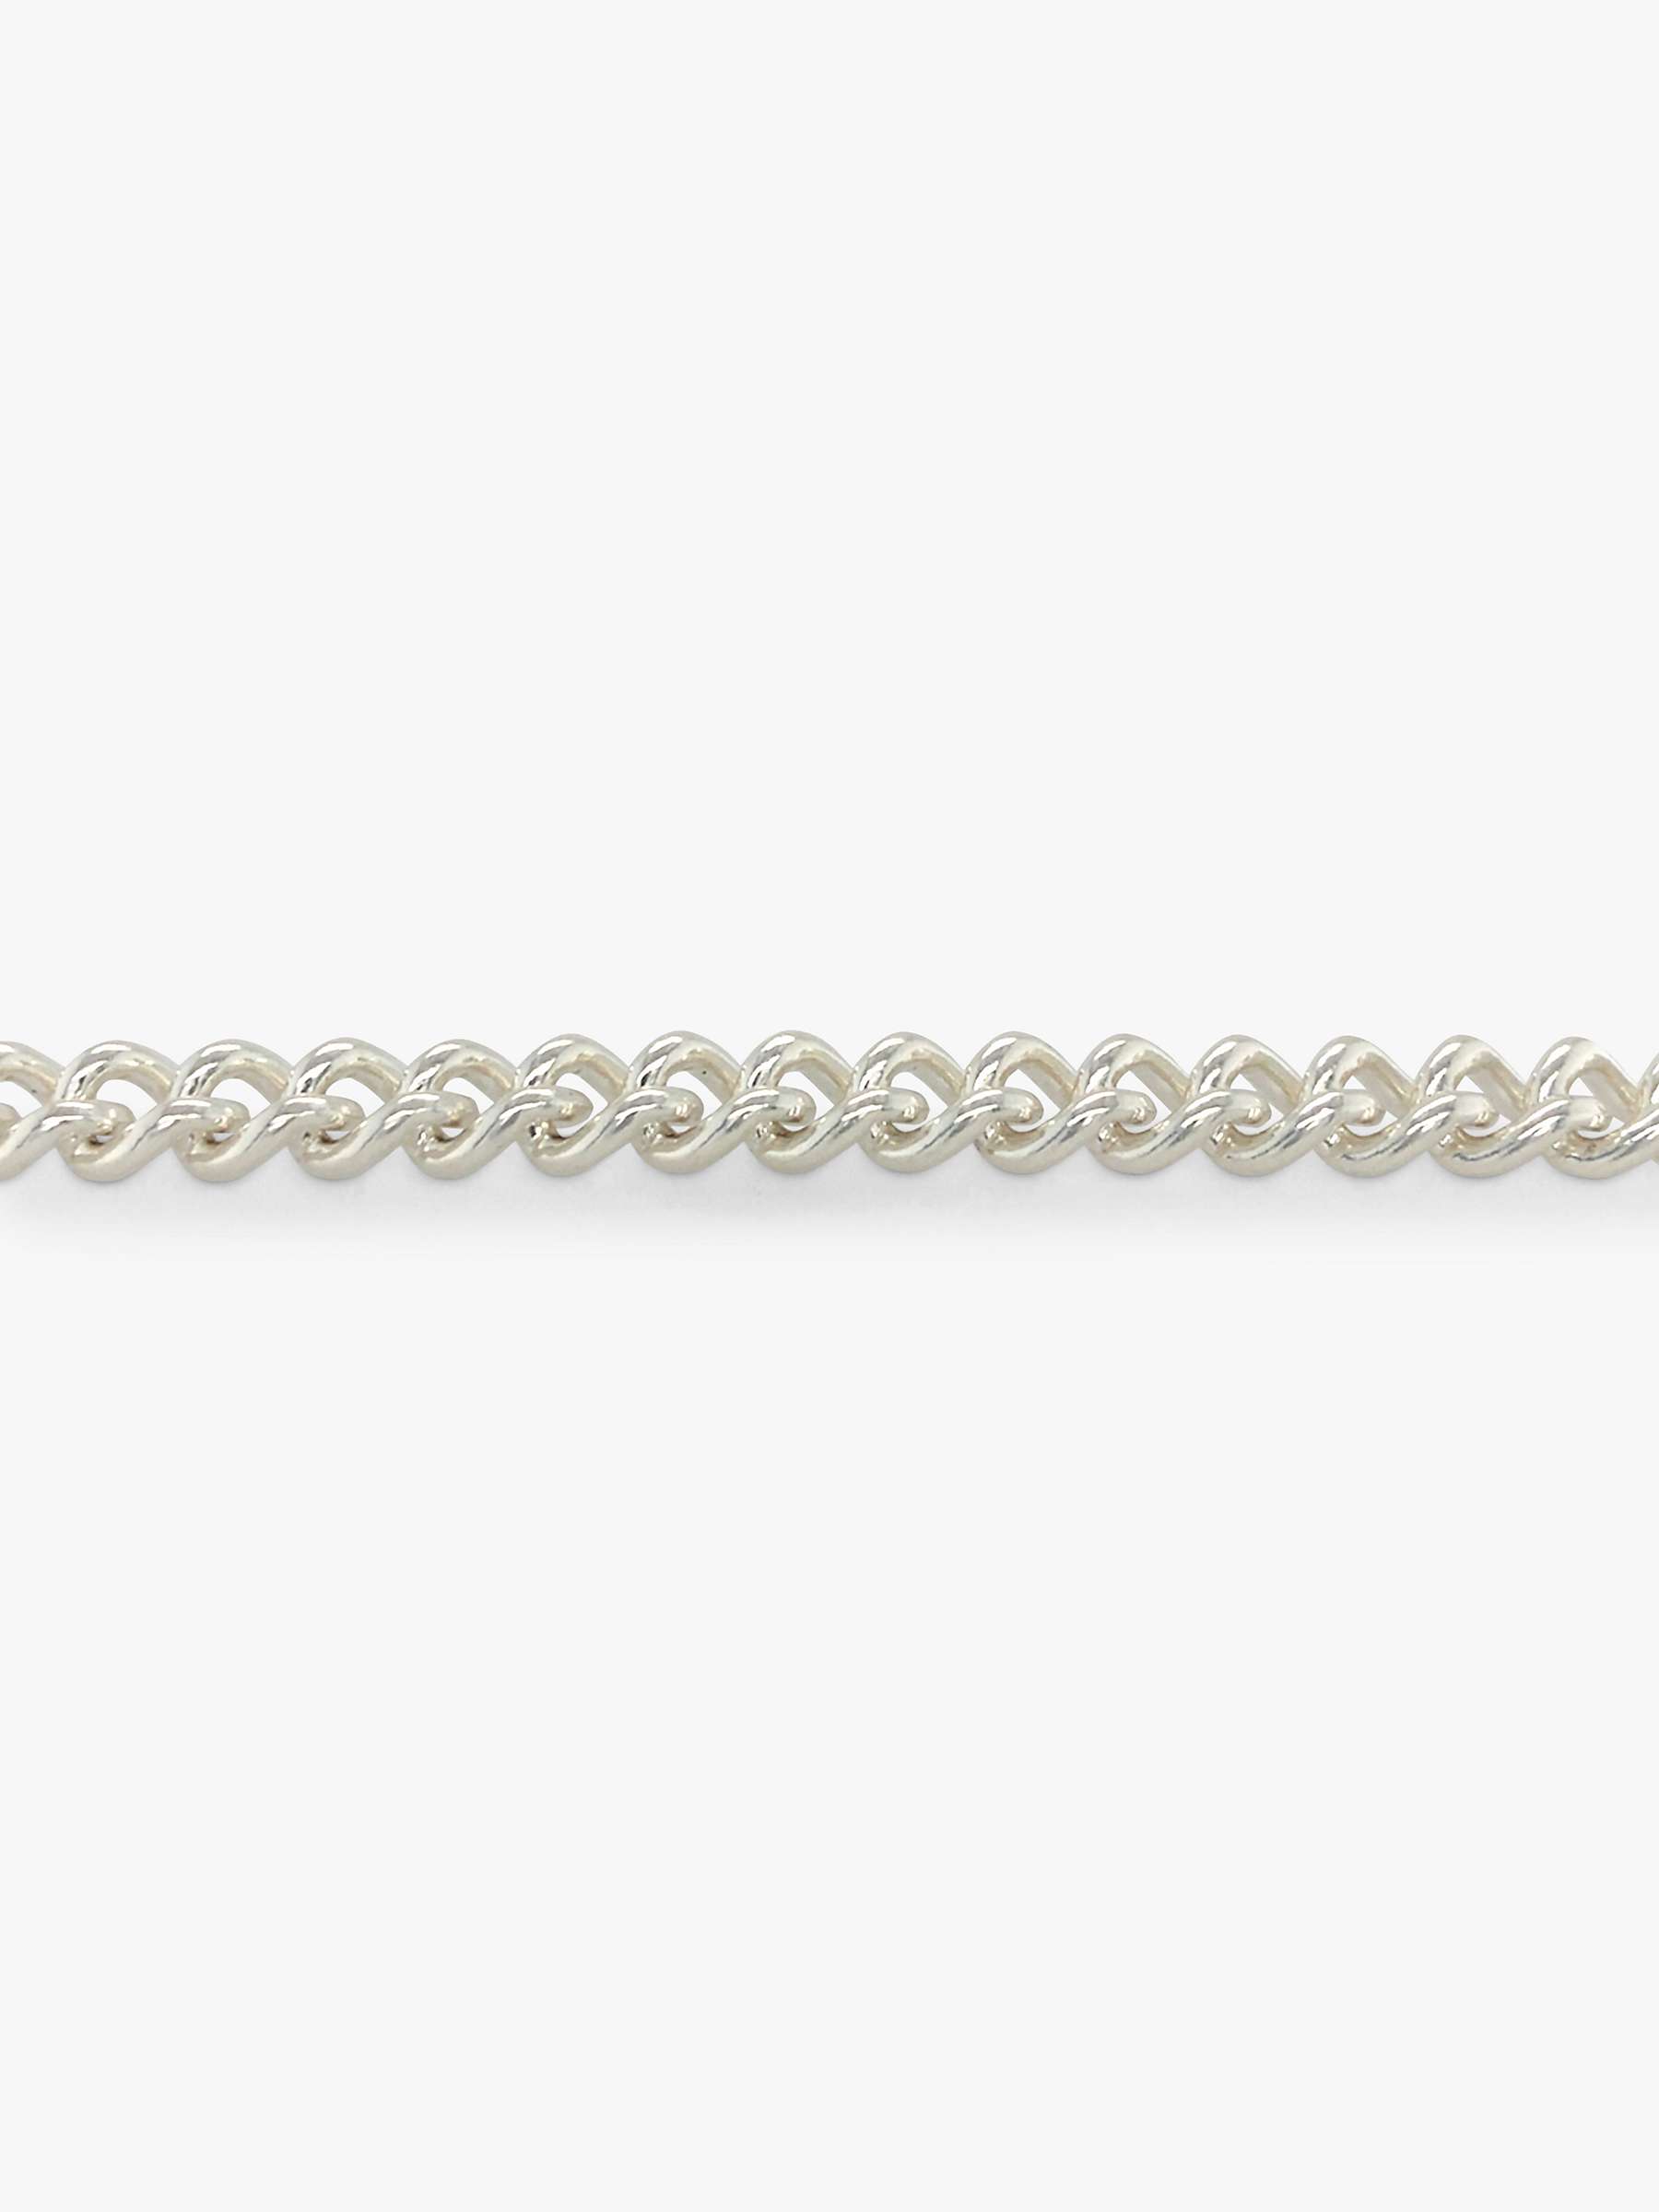 Buy Vintage Fine Jewellery Second Hand Curb Link Chain Necklace, Dated Circa 2000s Online at johnlewis.com